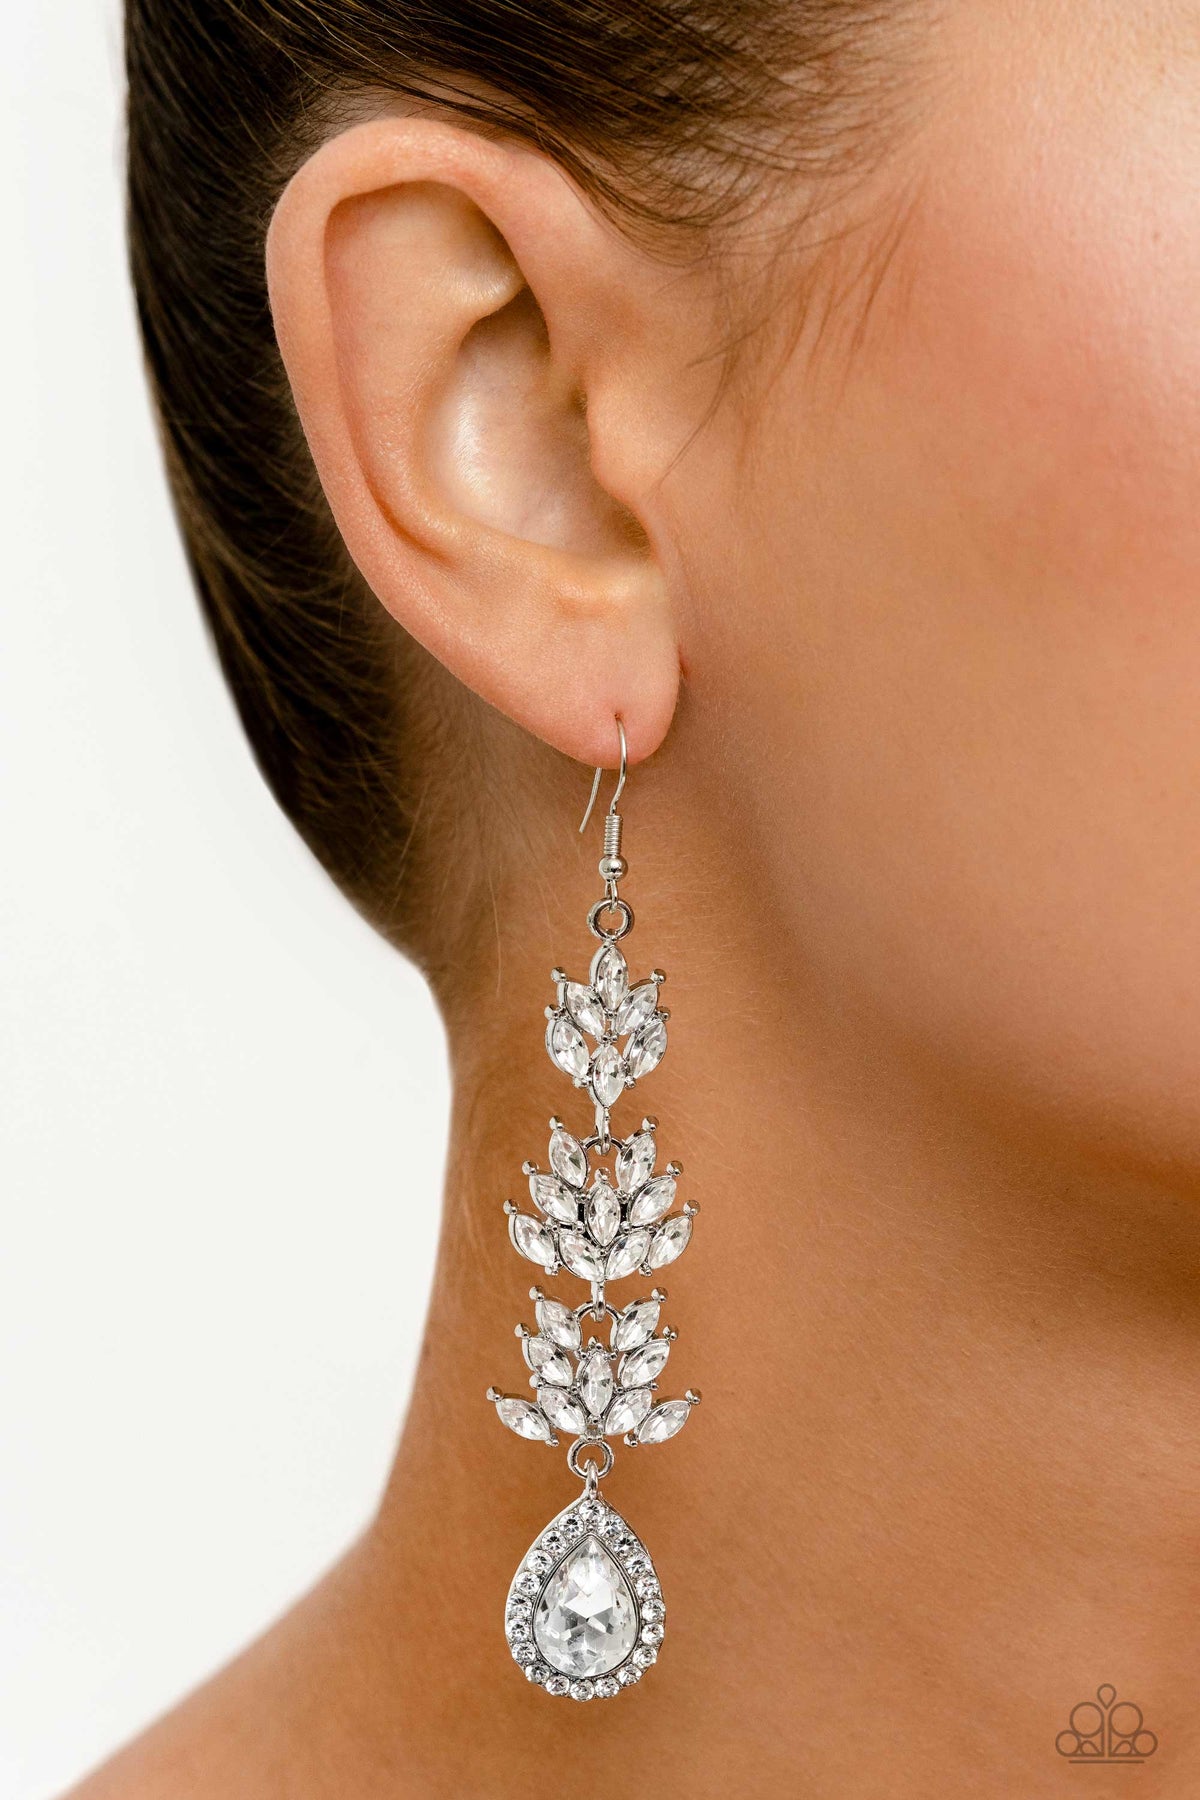 Water Lily Whimsy White Earrings - Paparazzi Accessories-on model - CarasShop.com - $5 Jewelry by Cara Jewels